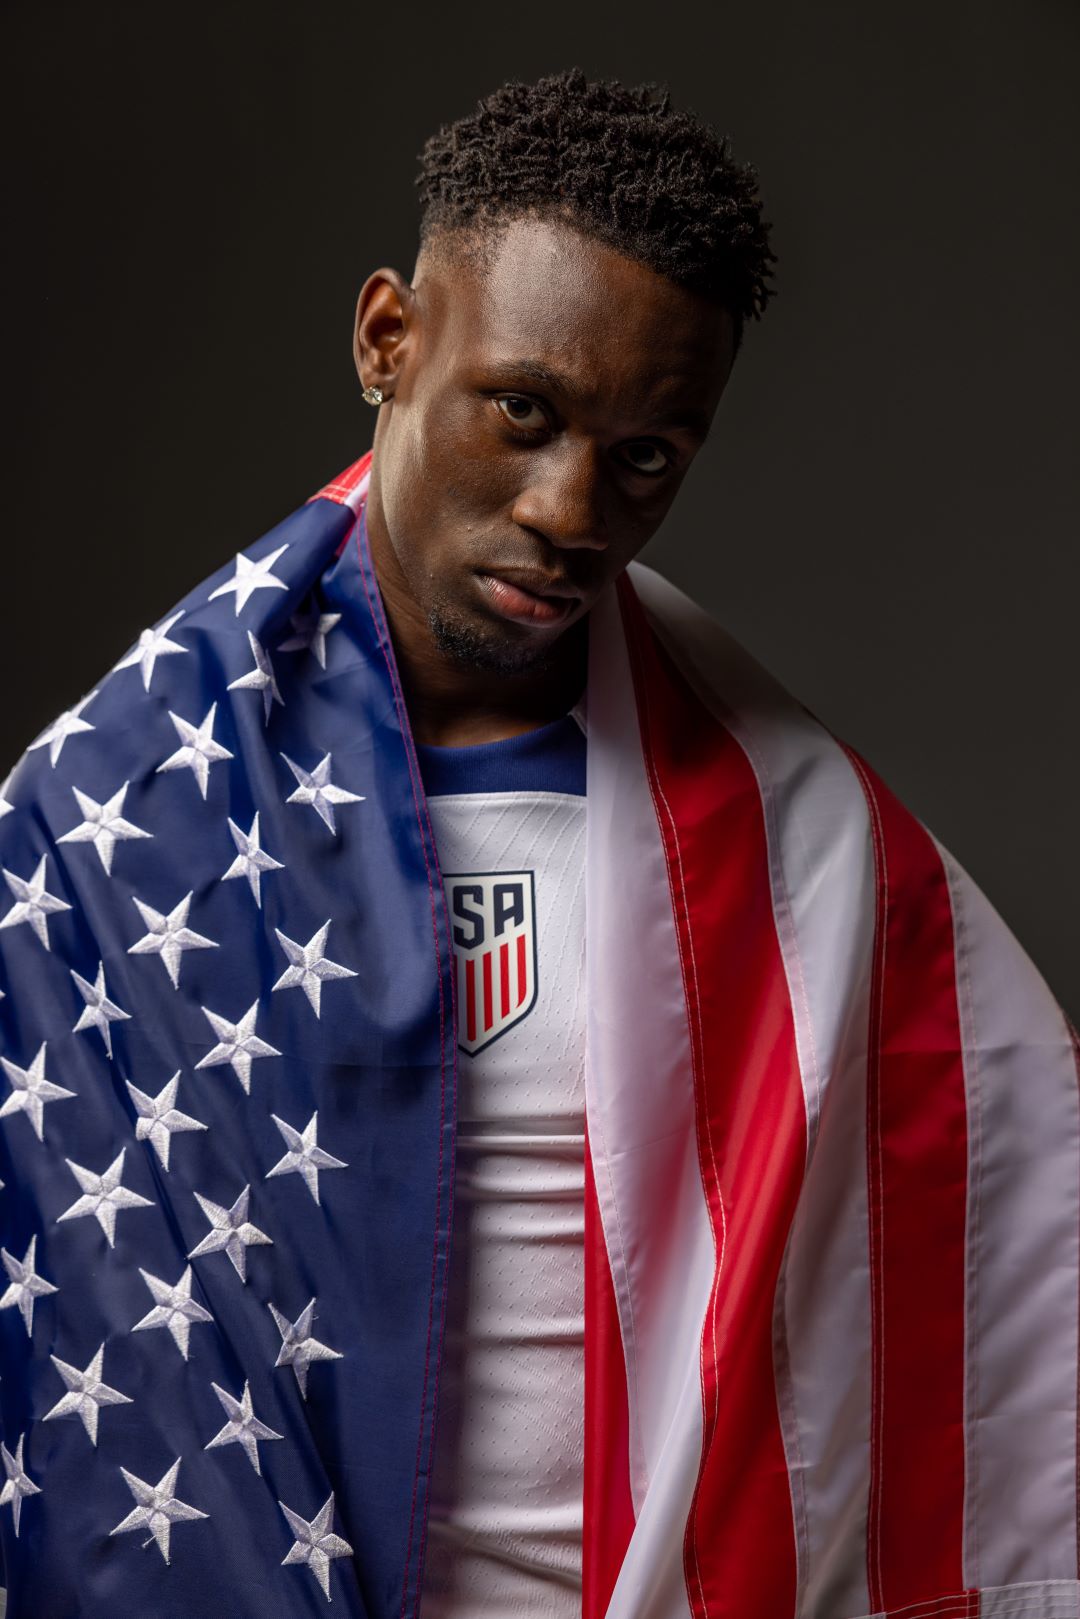 USMNT-eligible Folarin Balogun CONFIRMED to be in United States as NBA's  Orlando Magic honor him before game with custom jersey